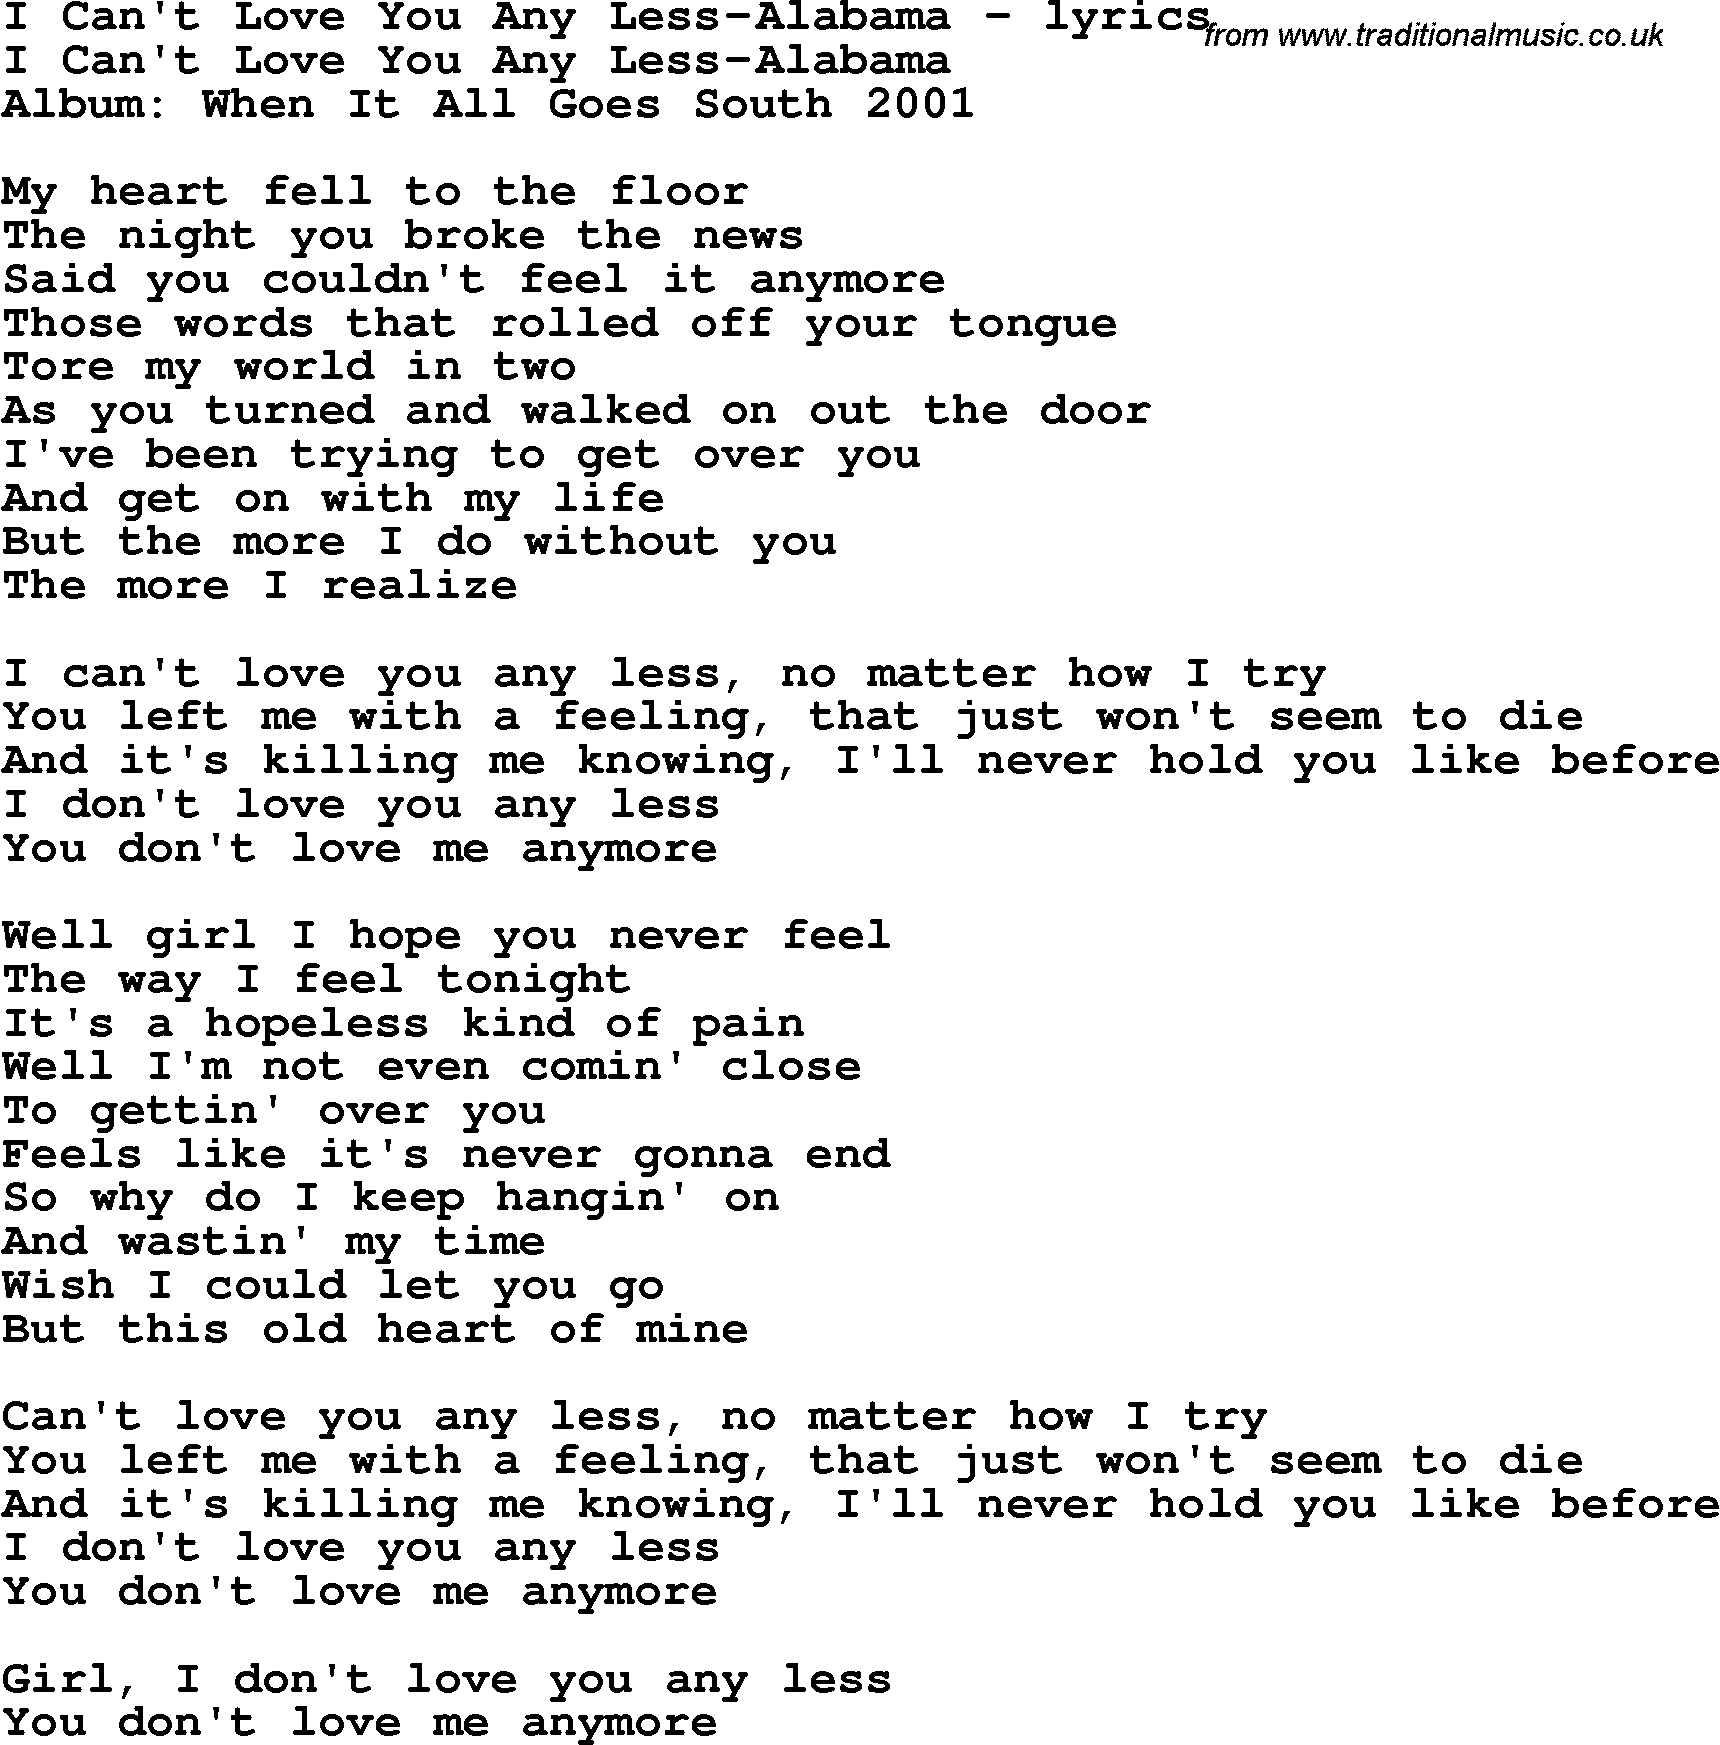 Love Song Lyrics for: I Can't Love You Any Less-Alabama